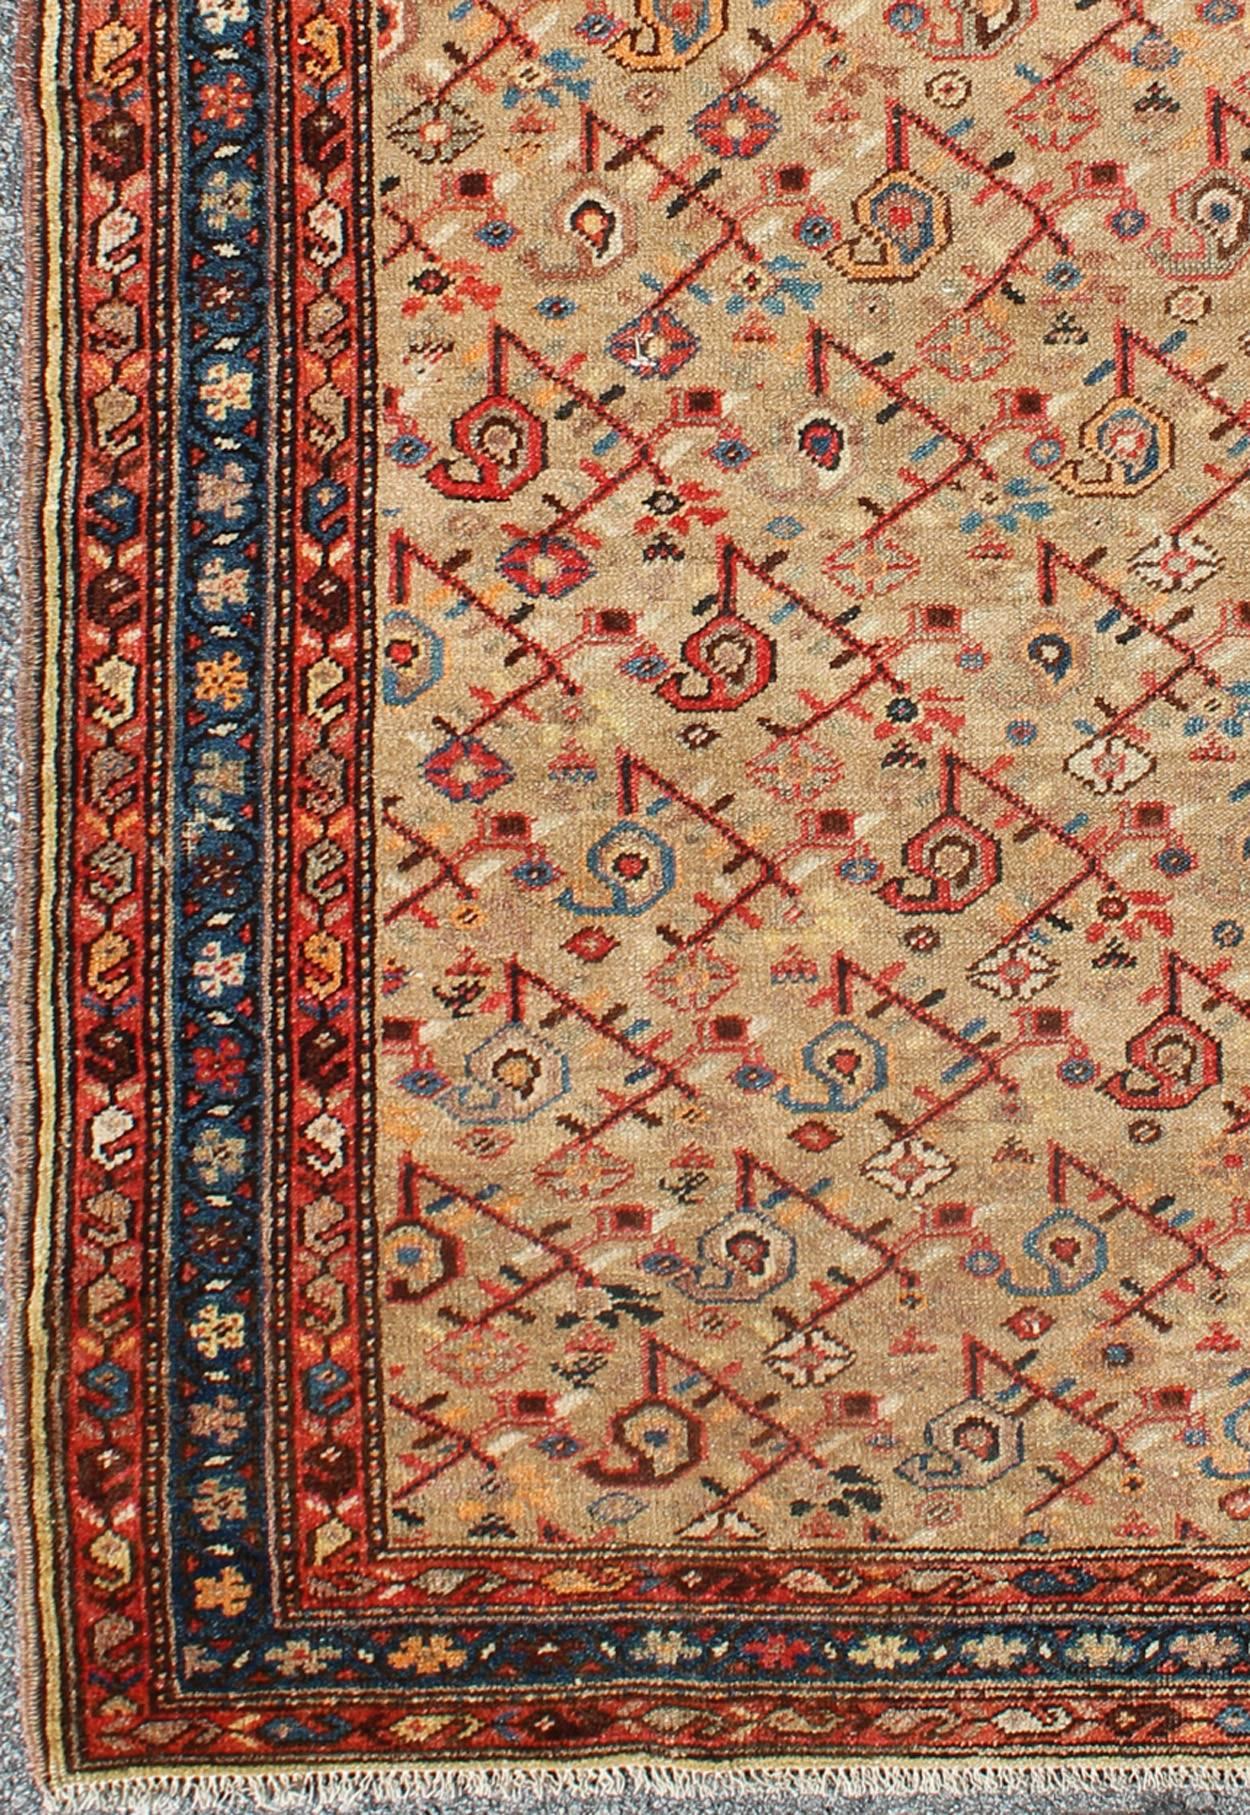 Antique N.W. Persian Malayer Rug with free-flowing all-over pattern, sand field, rug ema-7504, country of origin / type: Iran / Malayer, circa 1900.

This early 20th century antique Northwest Persian runner features a sand-colored field flanked by